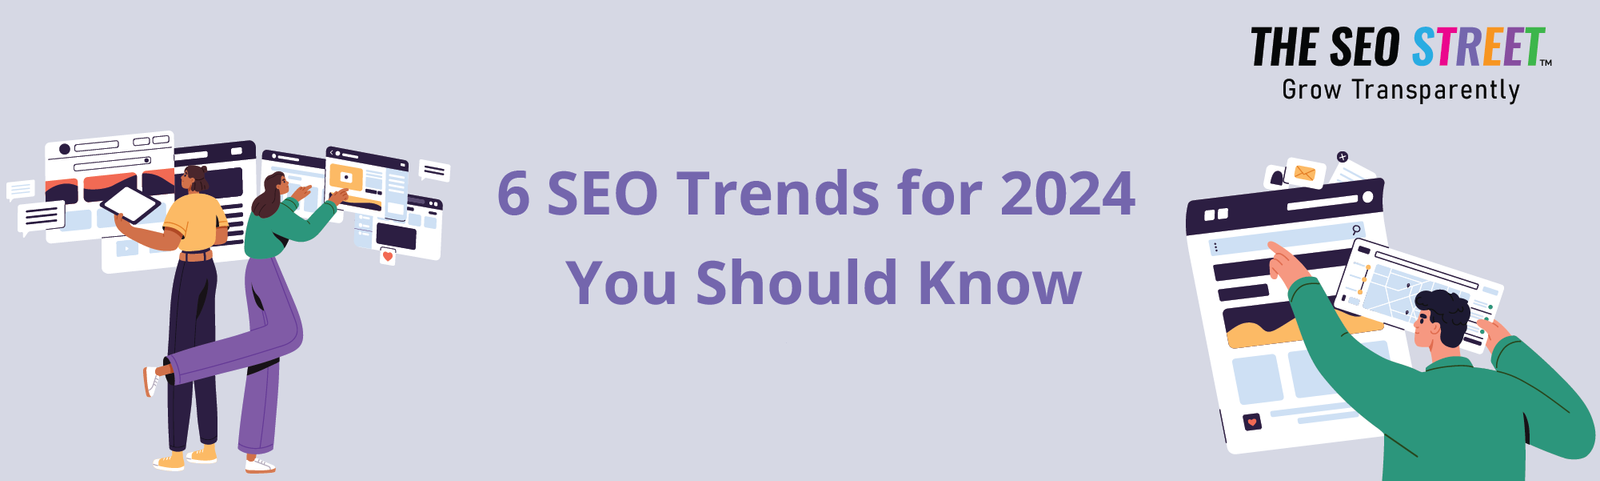 6 SEO Trends for 2024